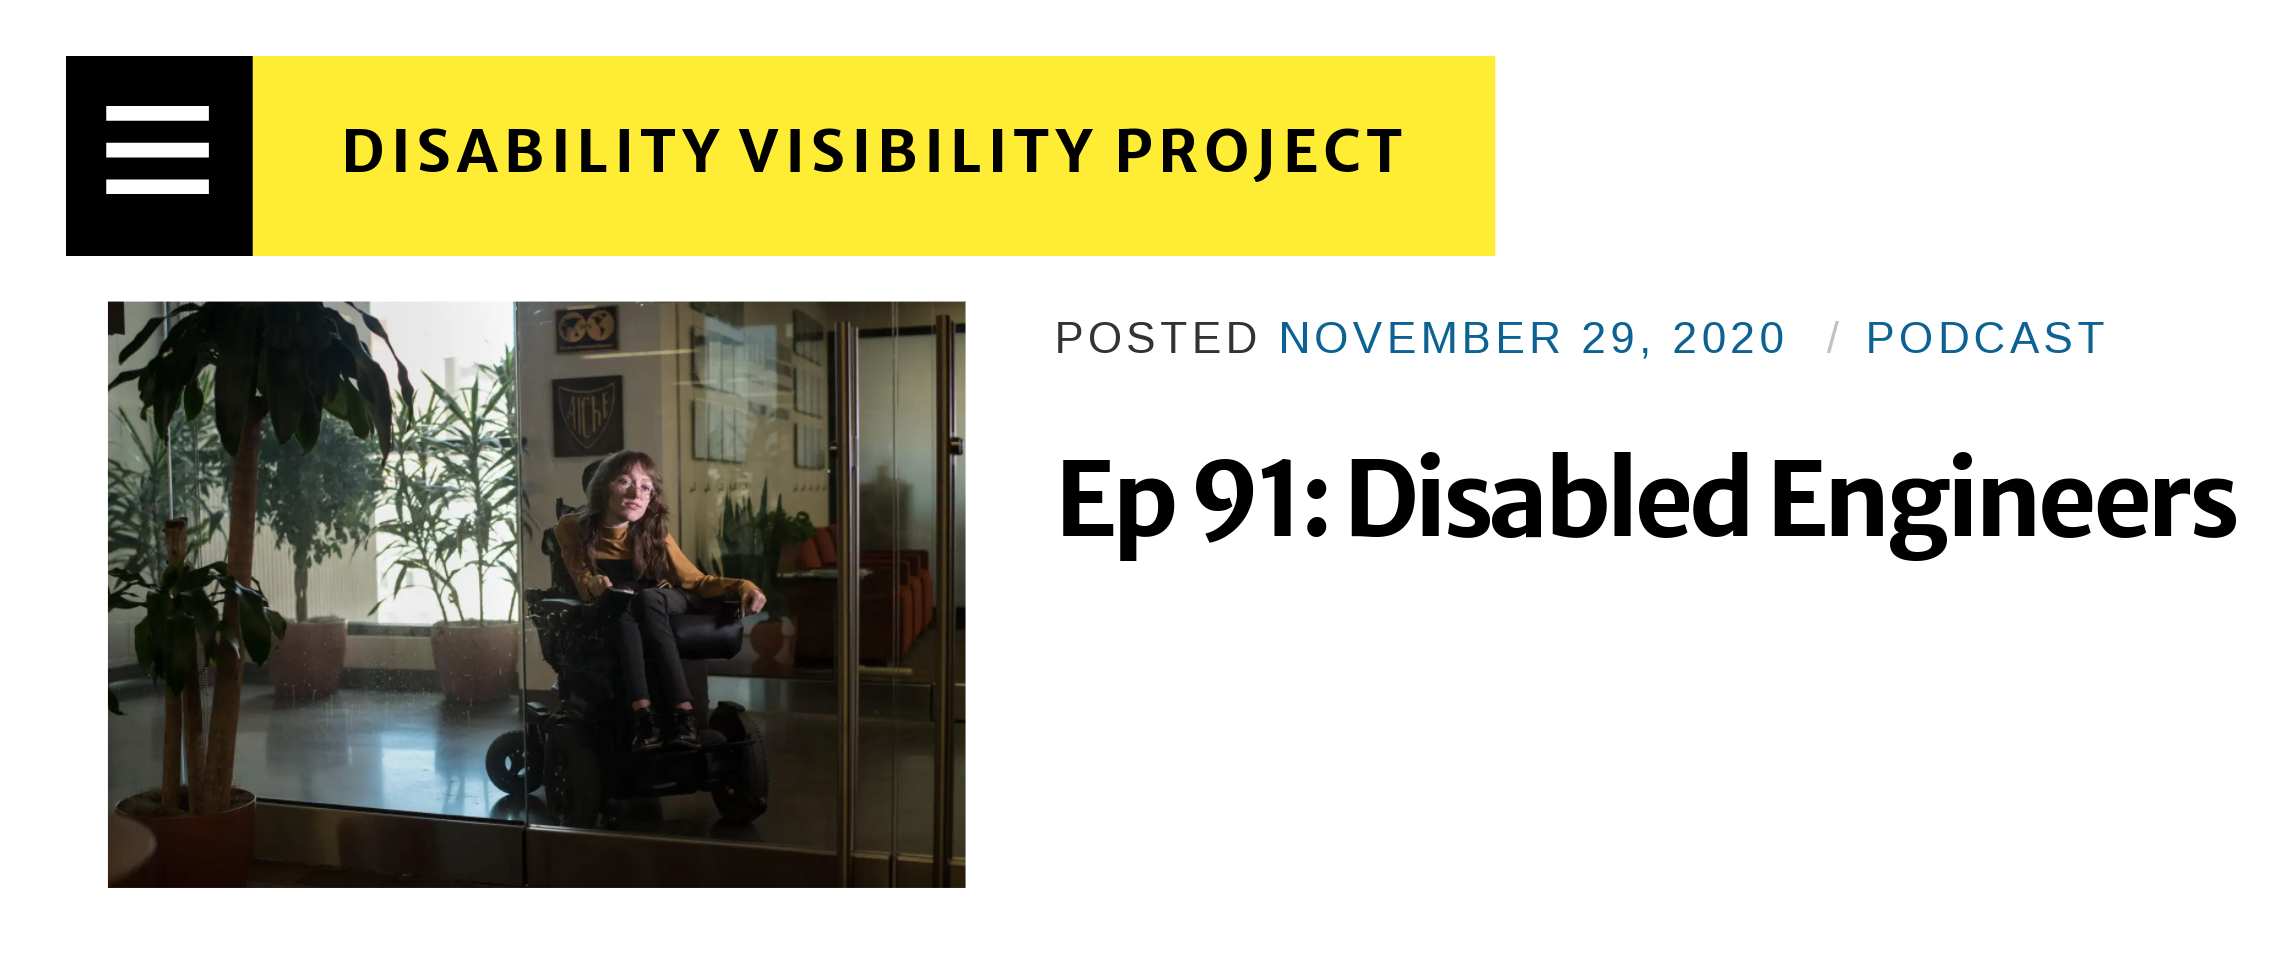 Disability Visibility Project. Posted November 29, 2020. Podcast. Episode 91: Disabled Engineers